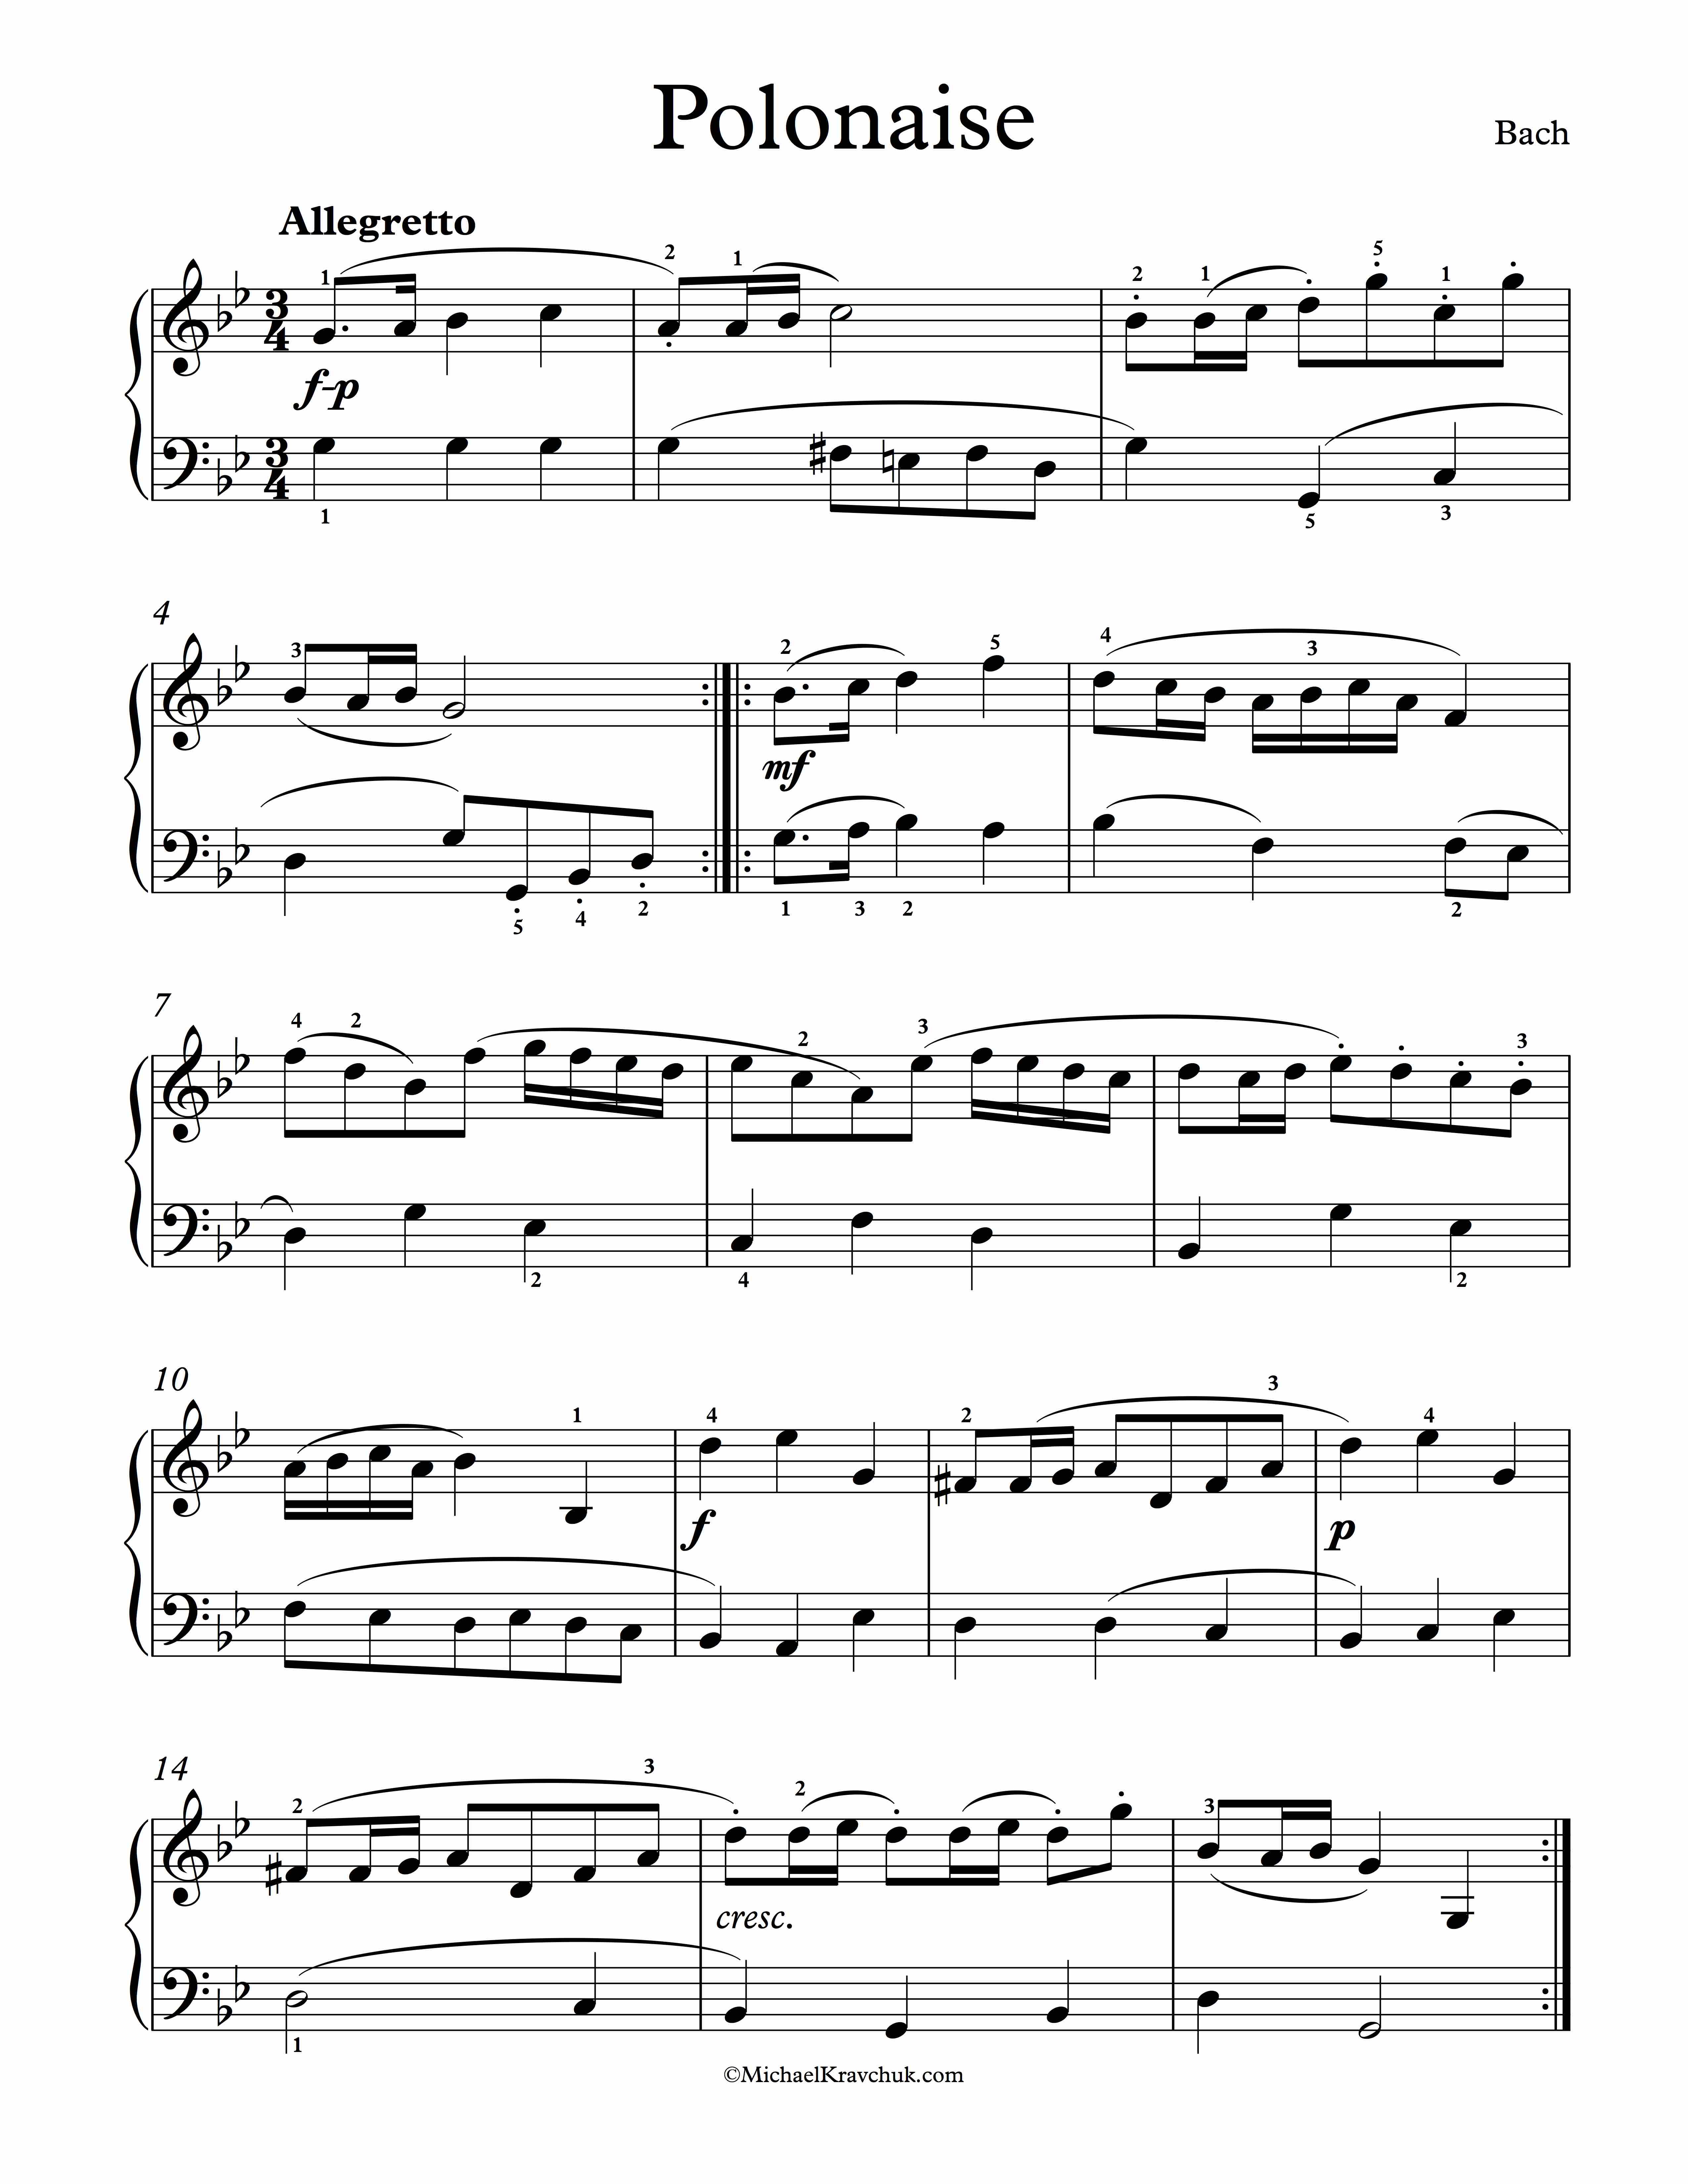 Free Piano Sheet Music - Polonaise In G Minor BWV Anh. 119 - Bach